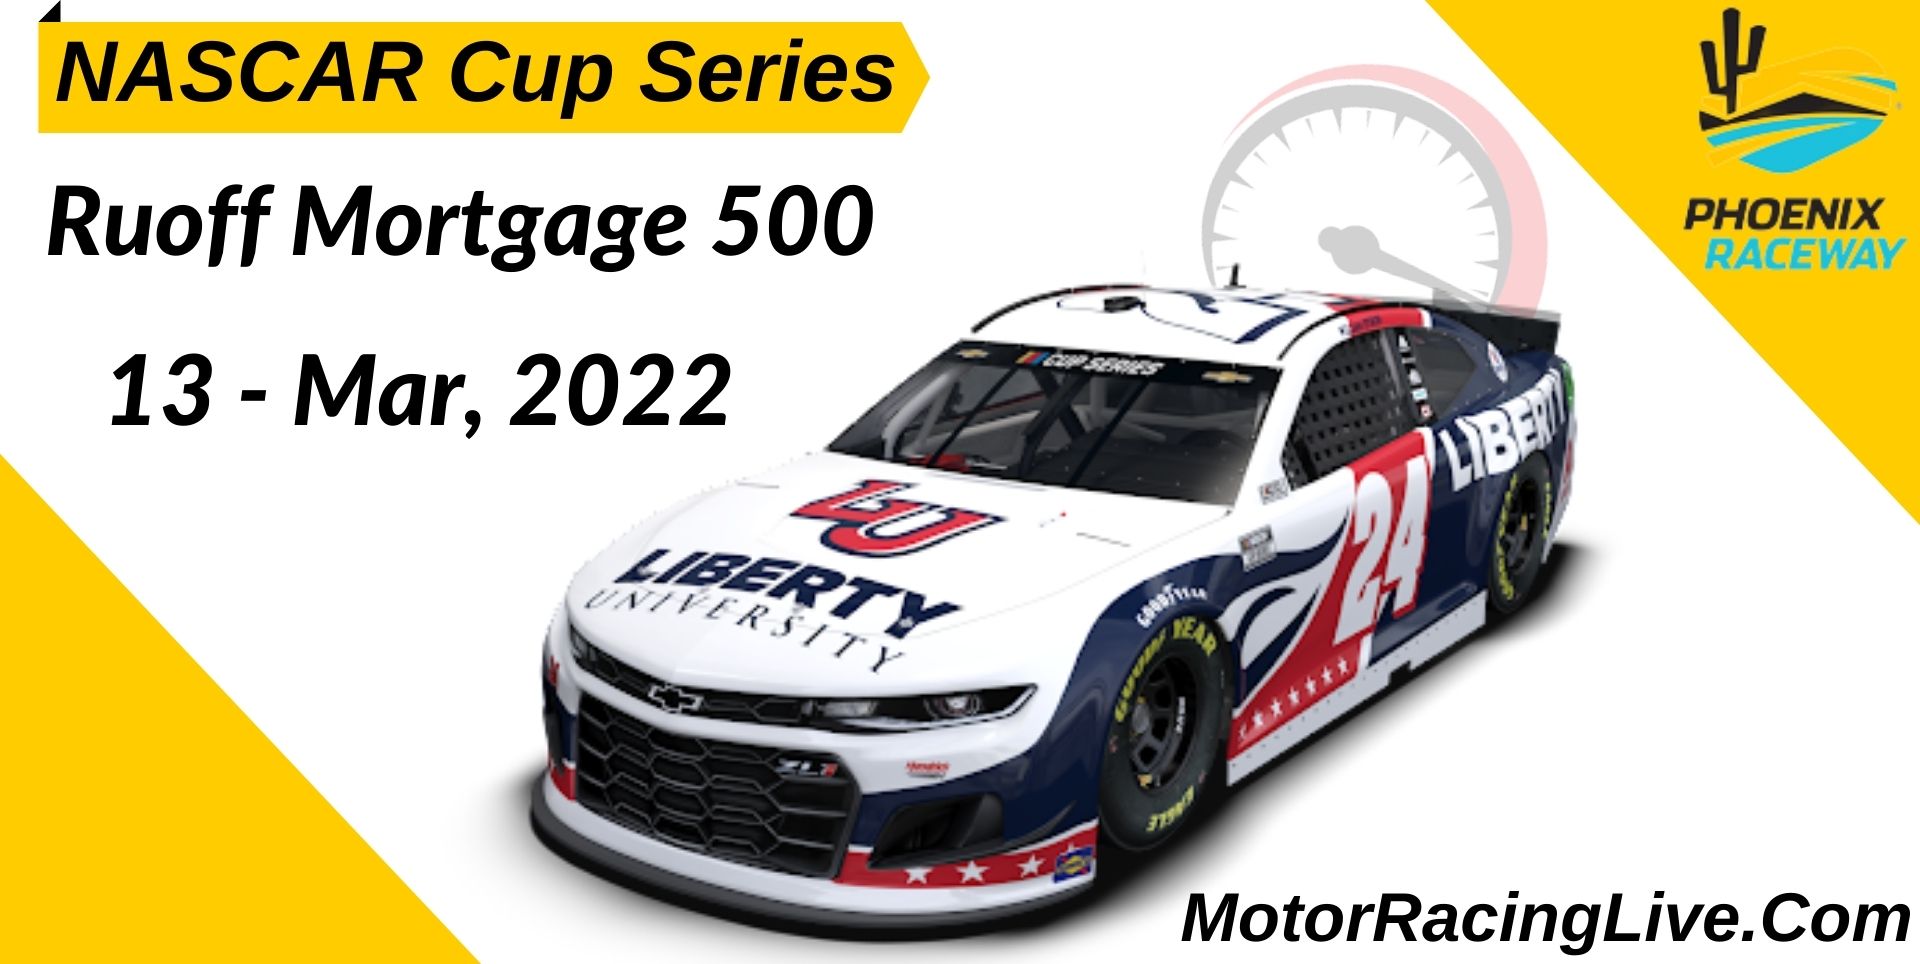 Ruoff Mortgage 500 Nascar Cup 2022 Live Stream